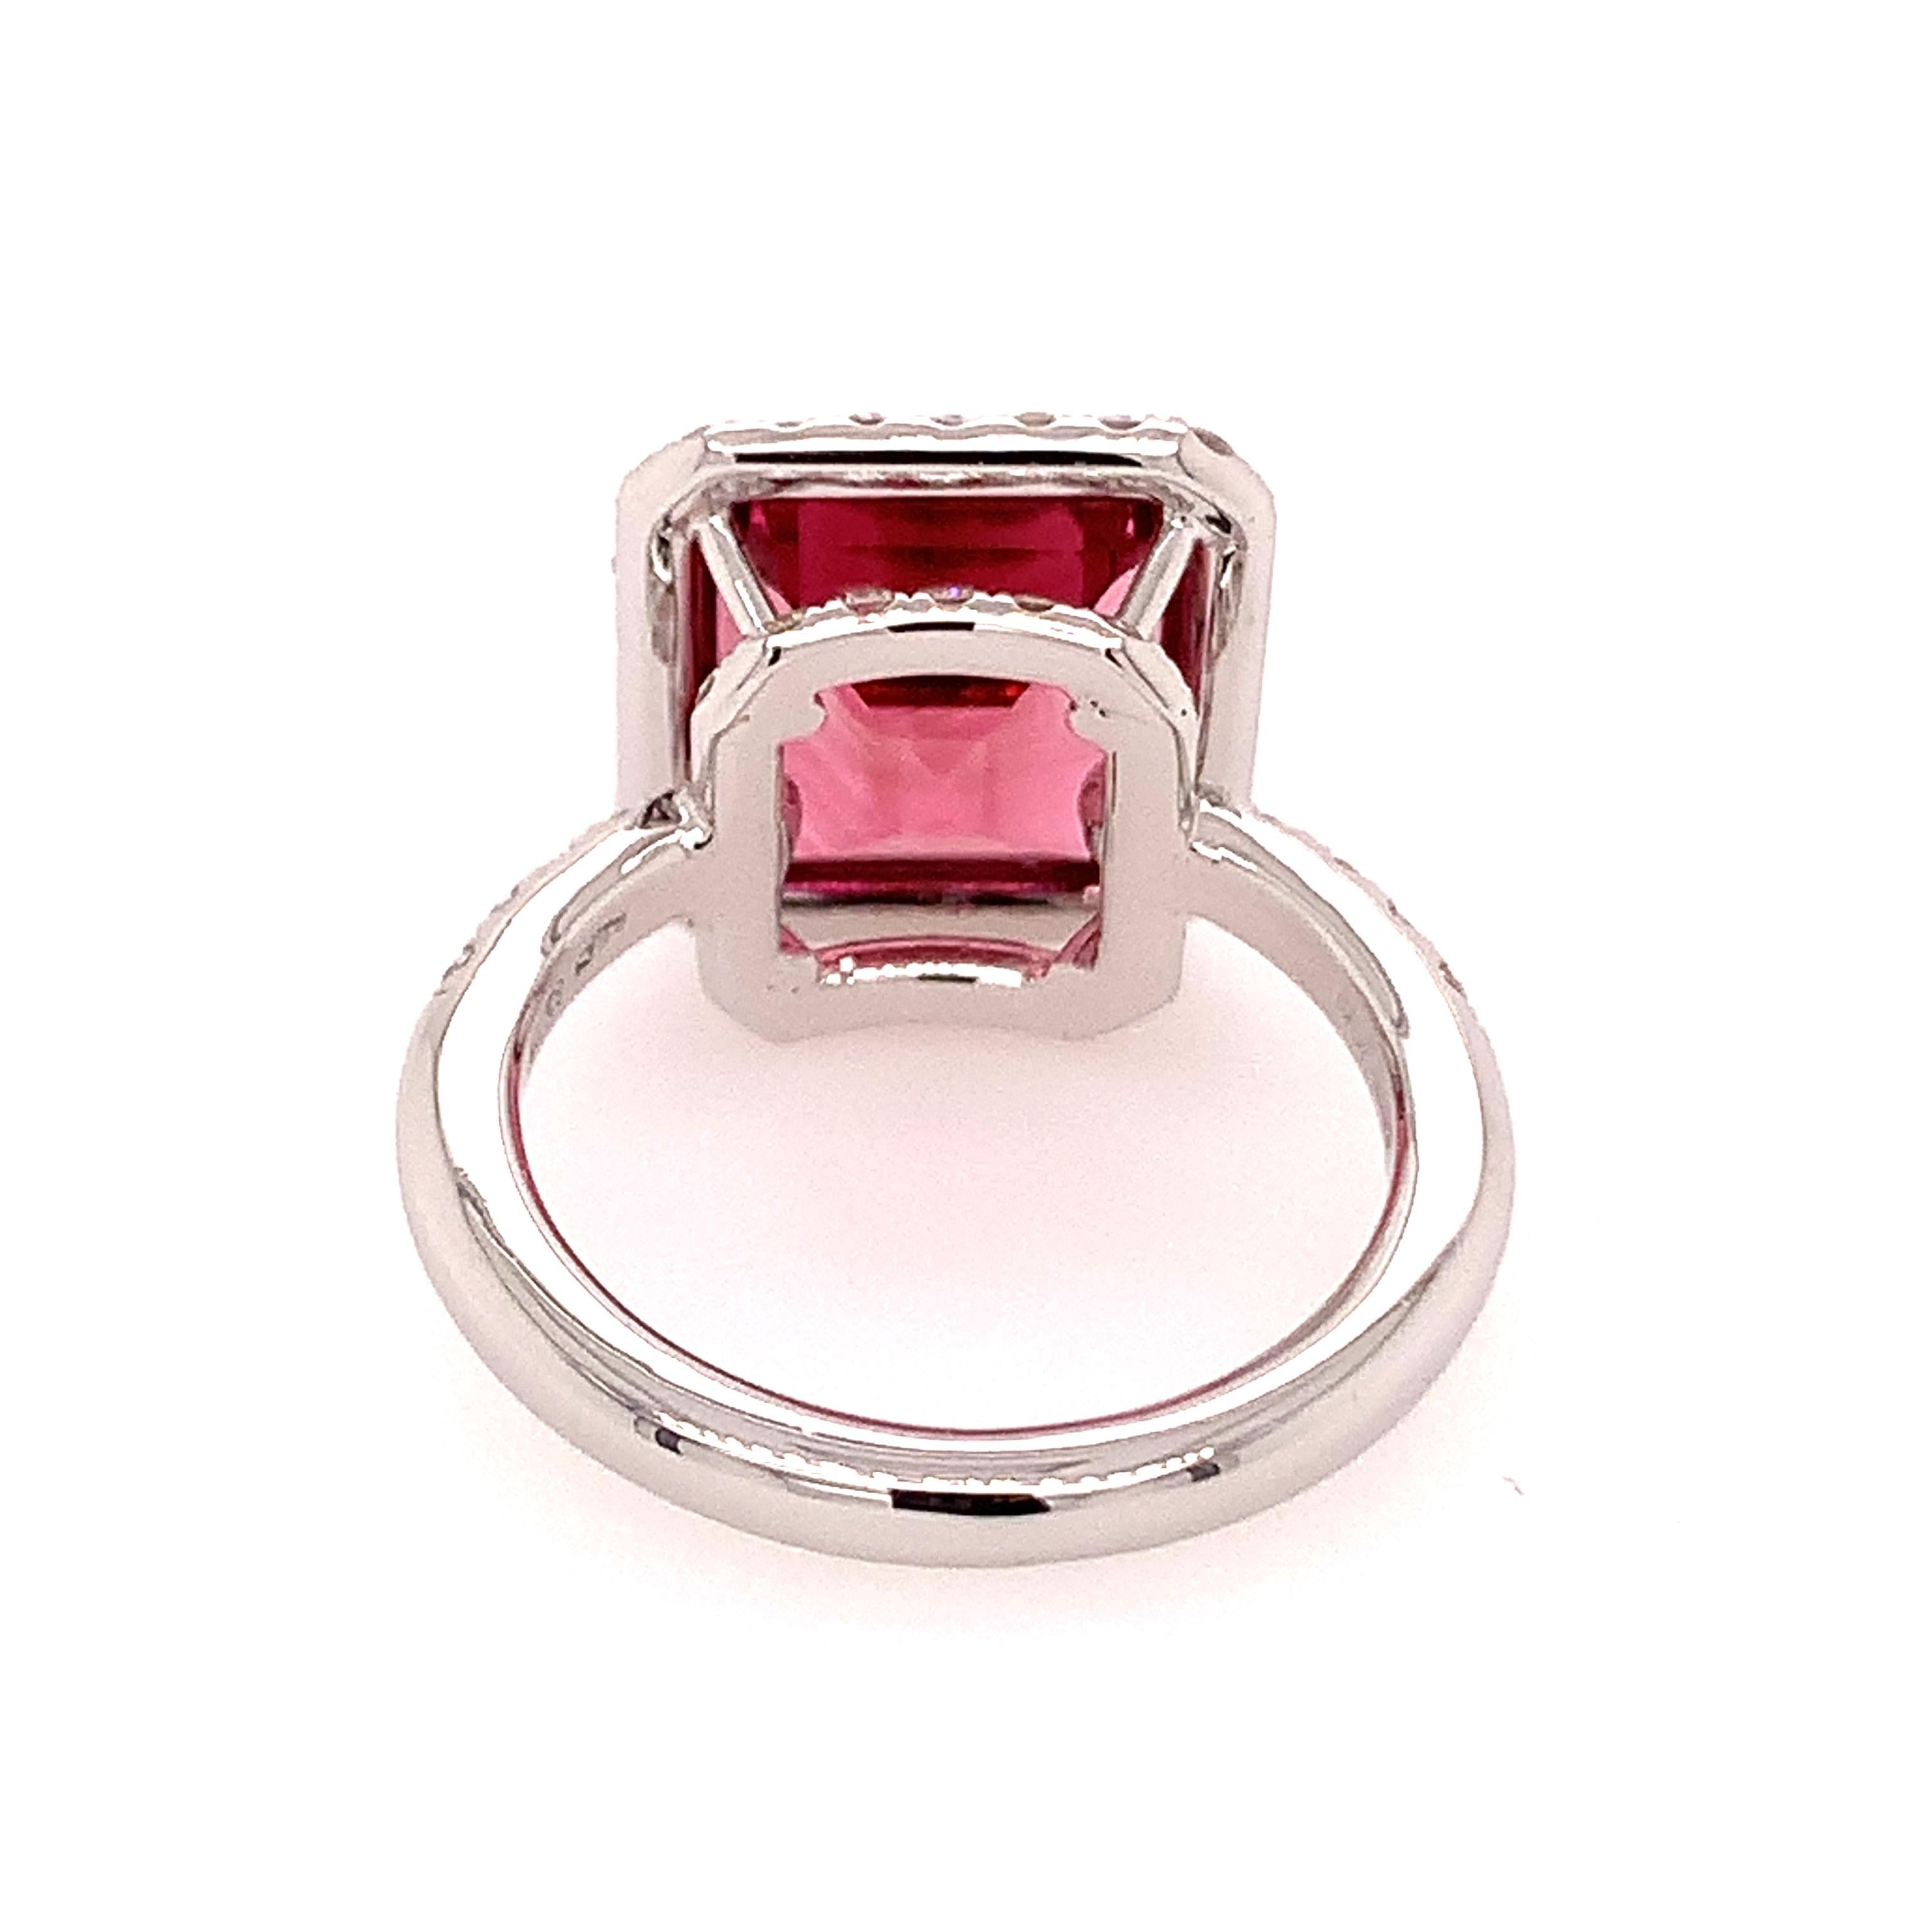 Square Cut 18kt White Gold One of A Kind Ring with Square Pink Tourmaline and Diamonds